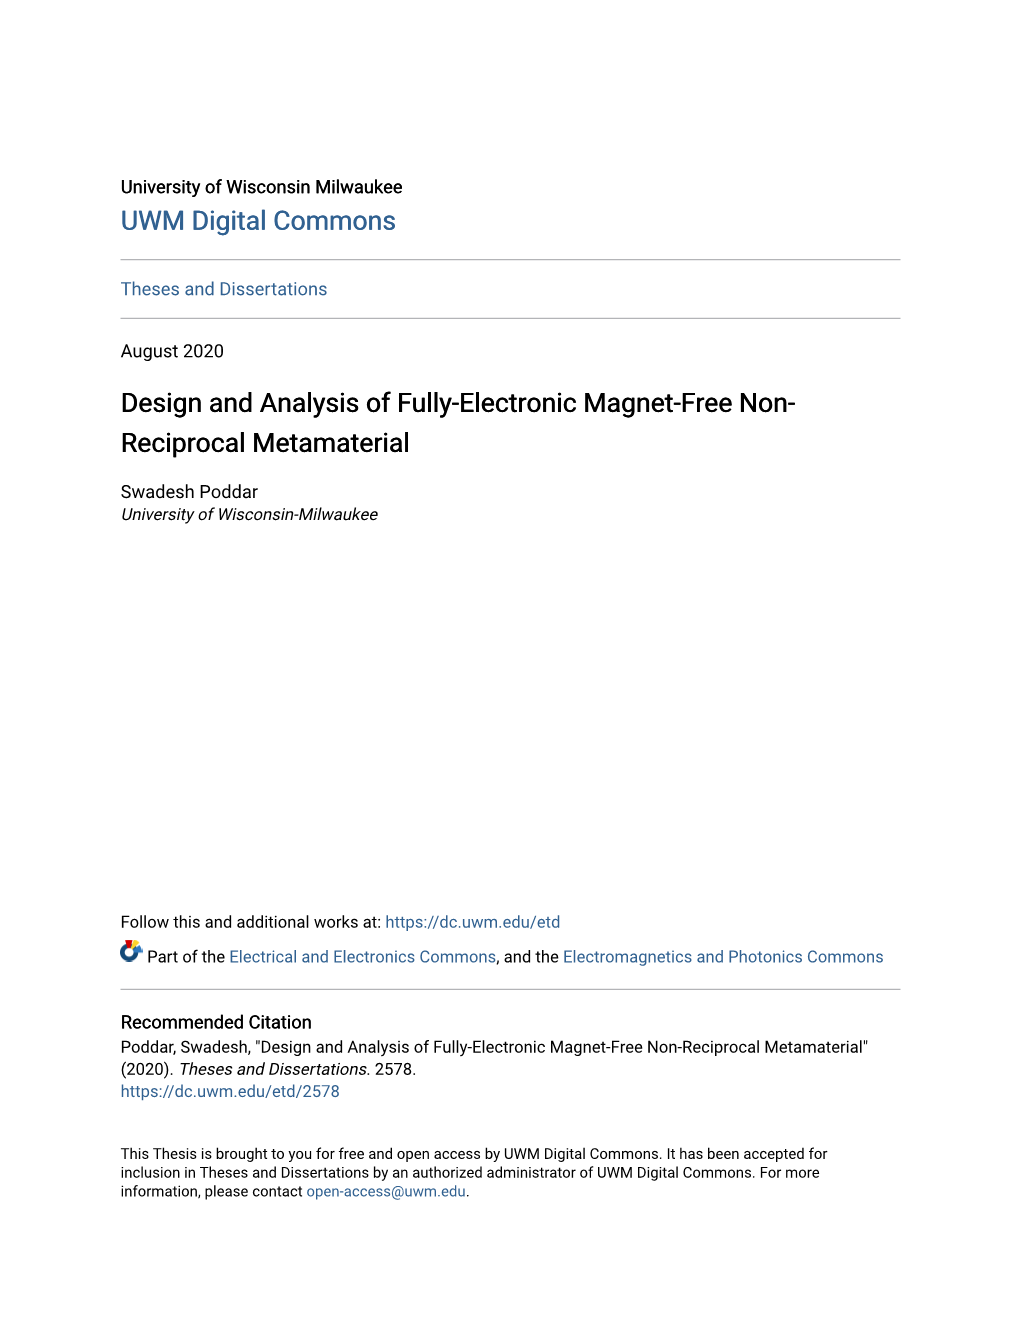 Design and Analysis of Fully-Electronic Magnet-Free Non-Reciprocal Metamaterial" (2020)